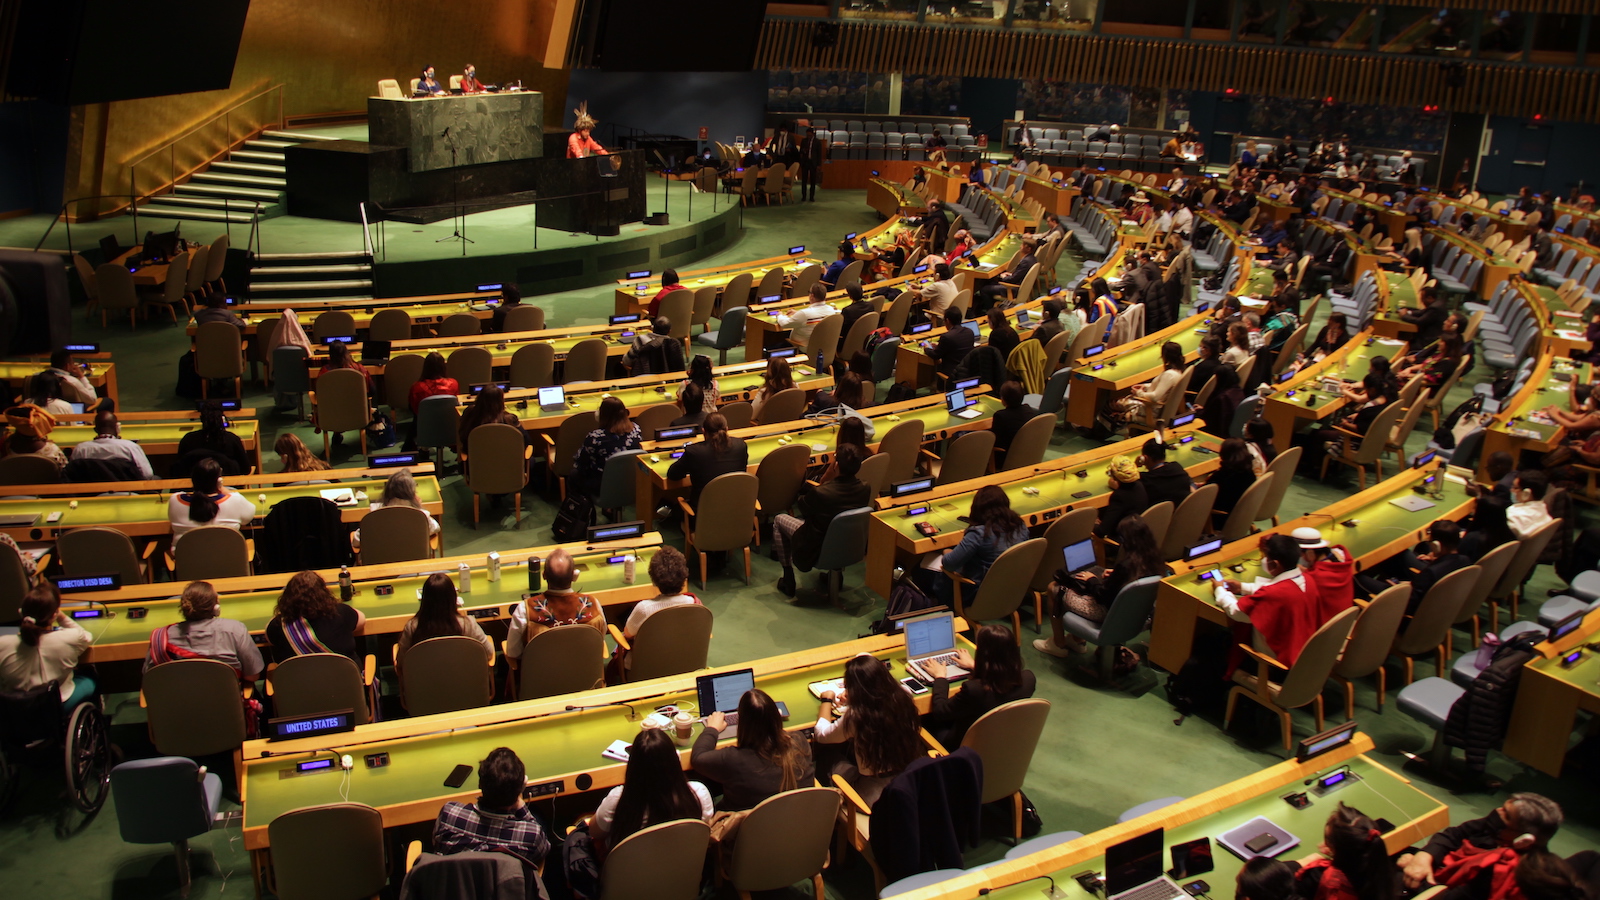 United Nation's Permanent Forum on Indigenous Issues, 2022 Opening, 21st Session April 25 - May 6, 2022.